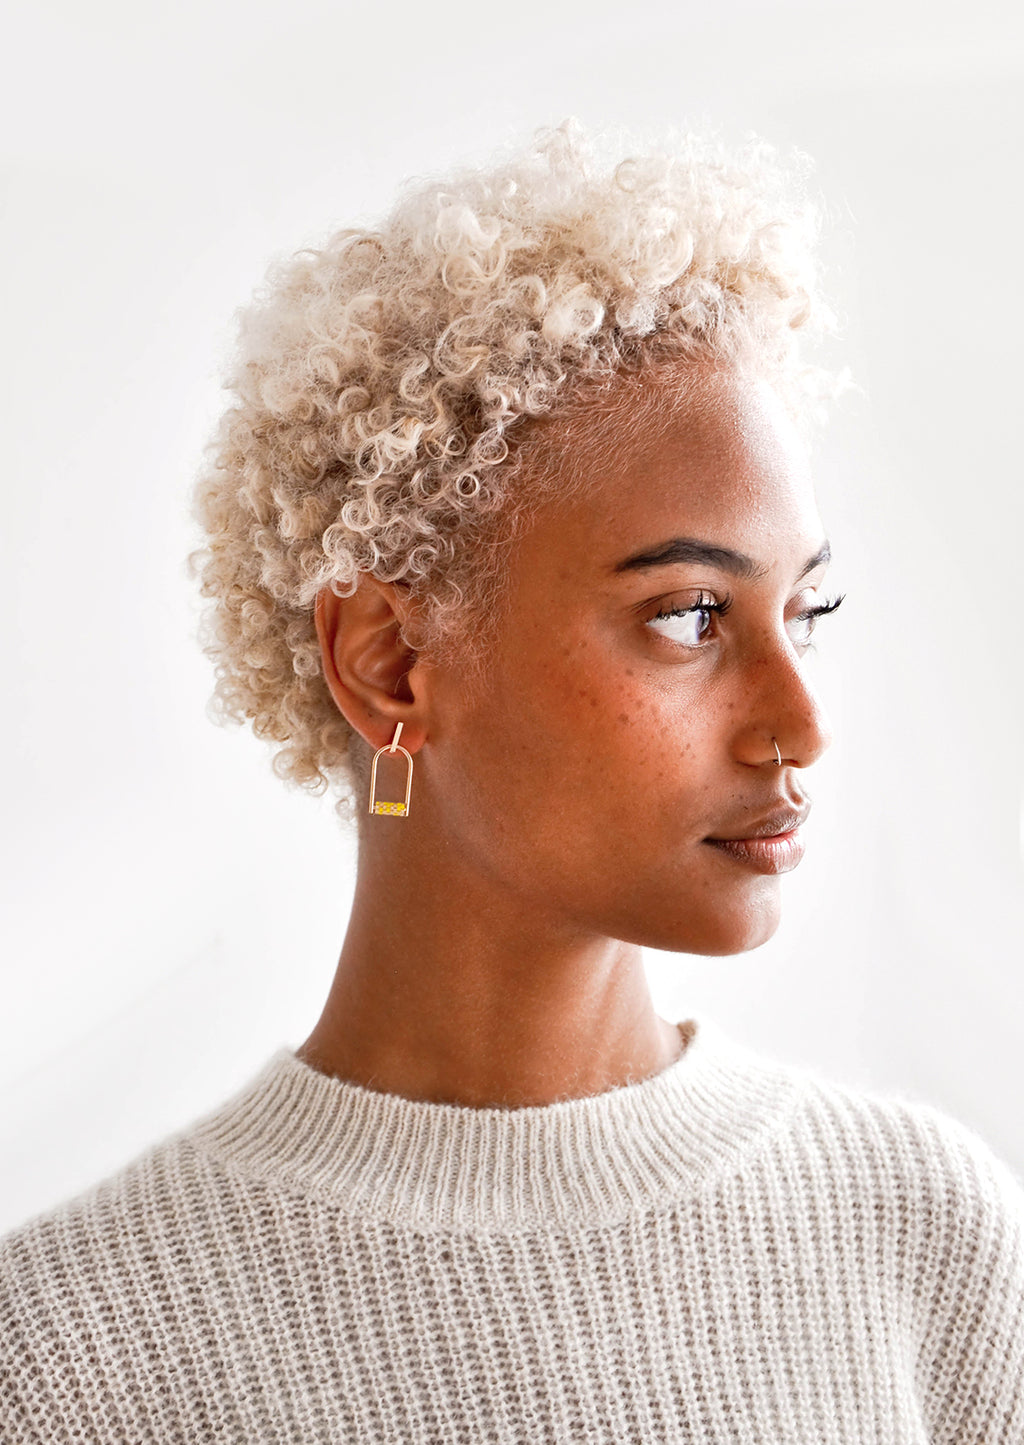 3: Model wears arced gold earrings with yellow beads and a cream colored sweater.